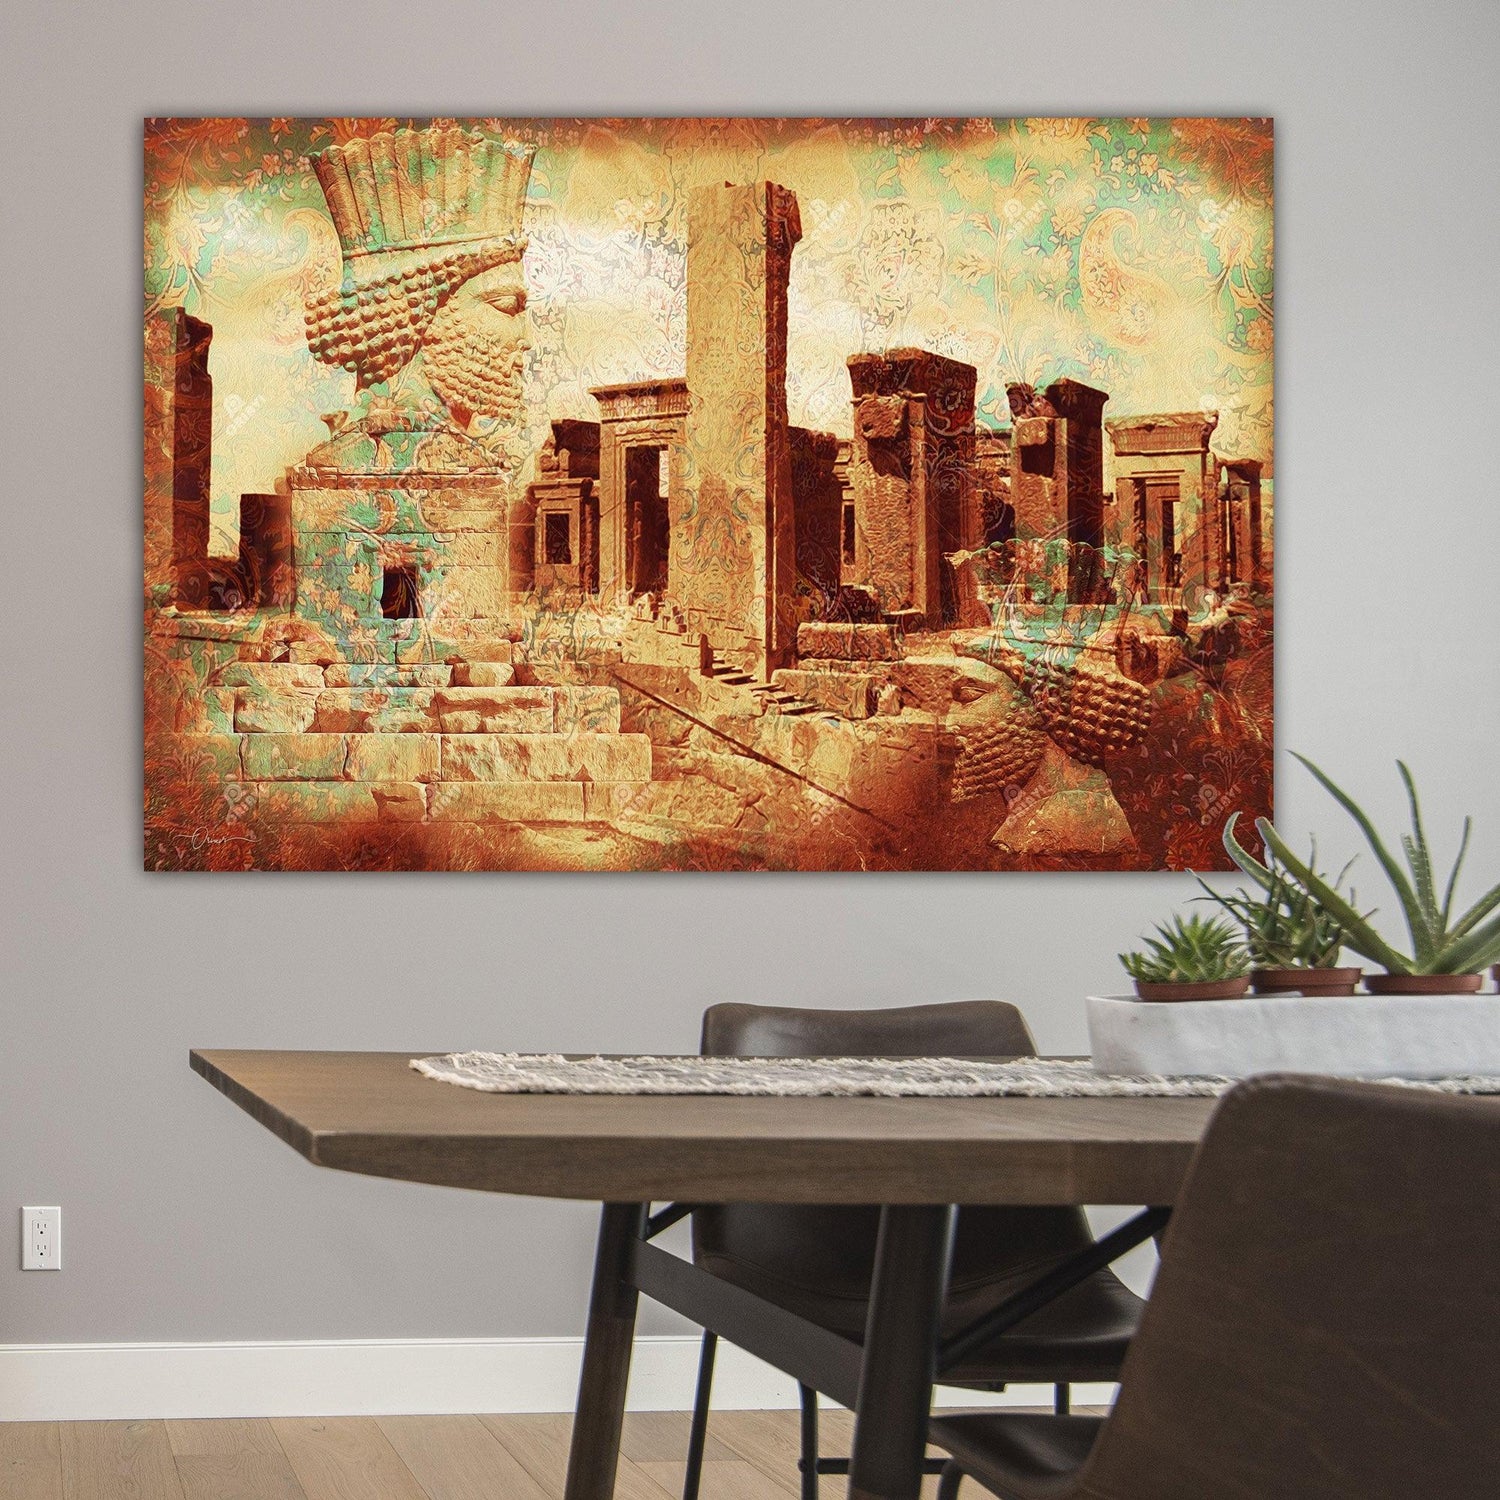 Tomb of Cyrus the great & Takht-e Jamshid - Persian calligraphy wall art, High Quality and Ready to Hang. This Modern Persian Wall décor completes and elevates your home. Amazing and eye-catching for your home or office.